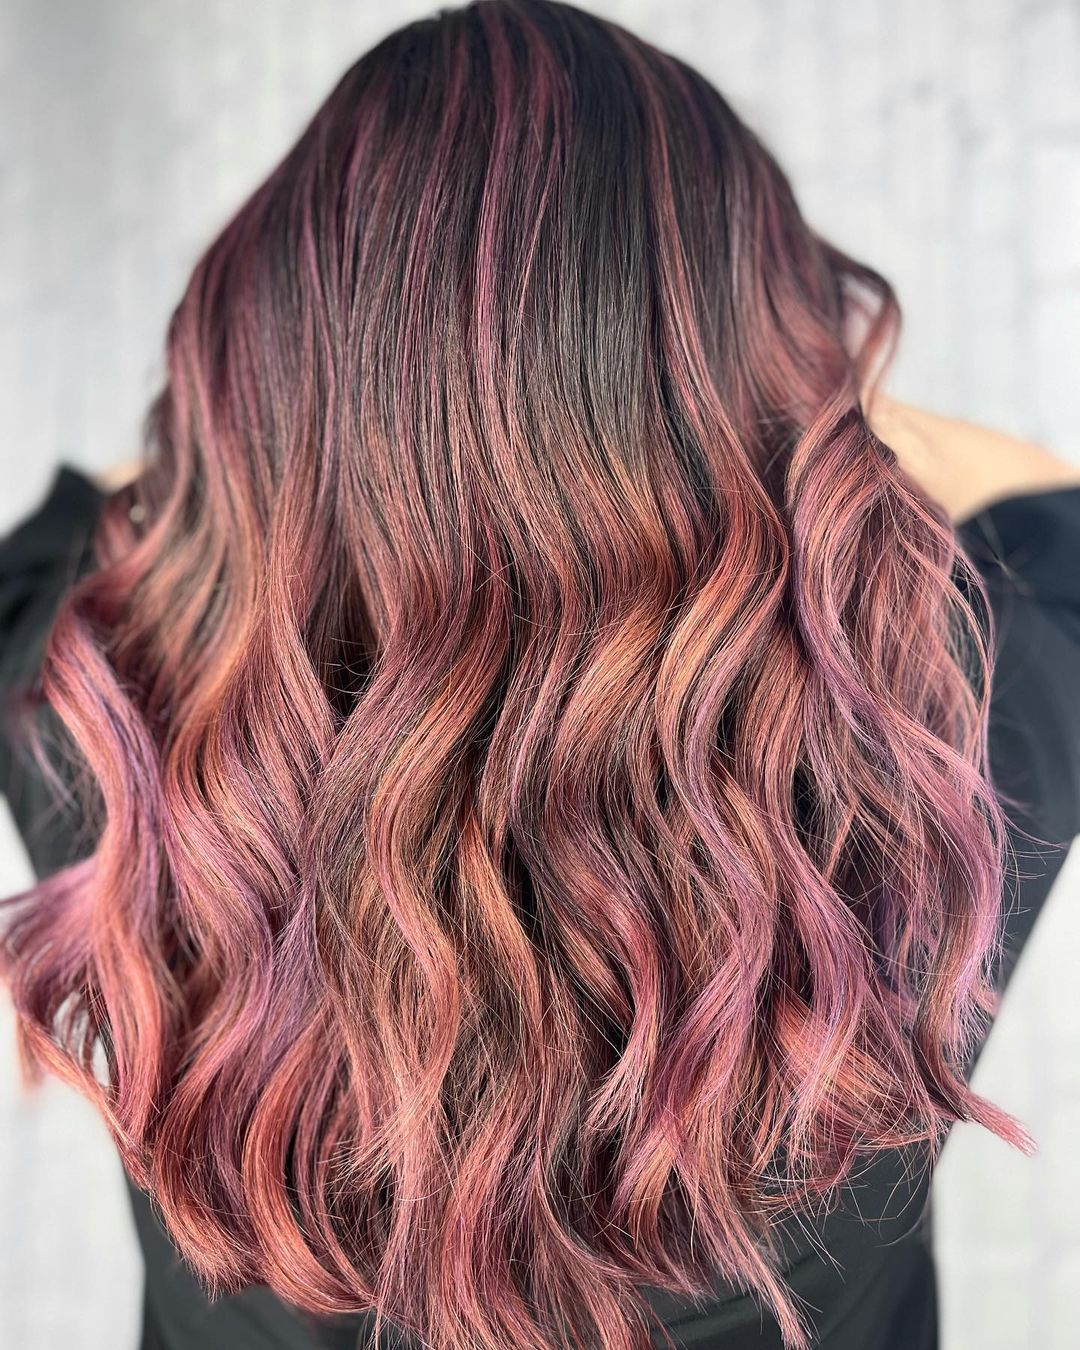 Curly Hairstyle in Rose Gold Tones for Thick Hair